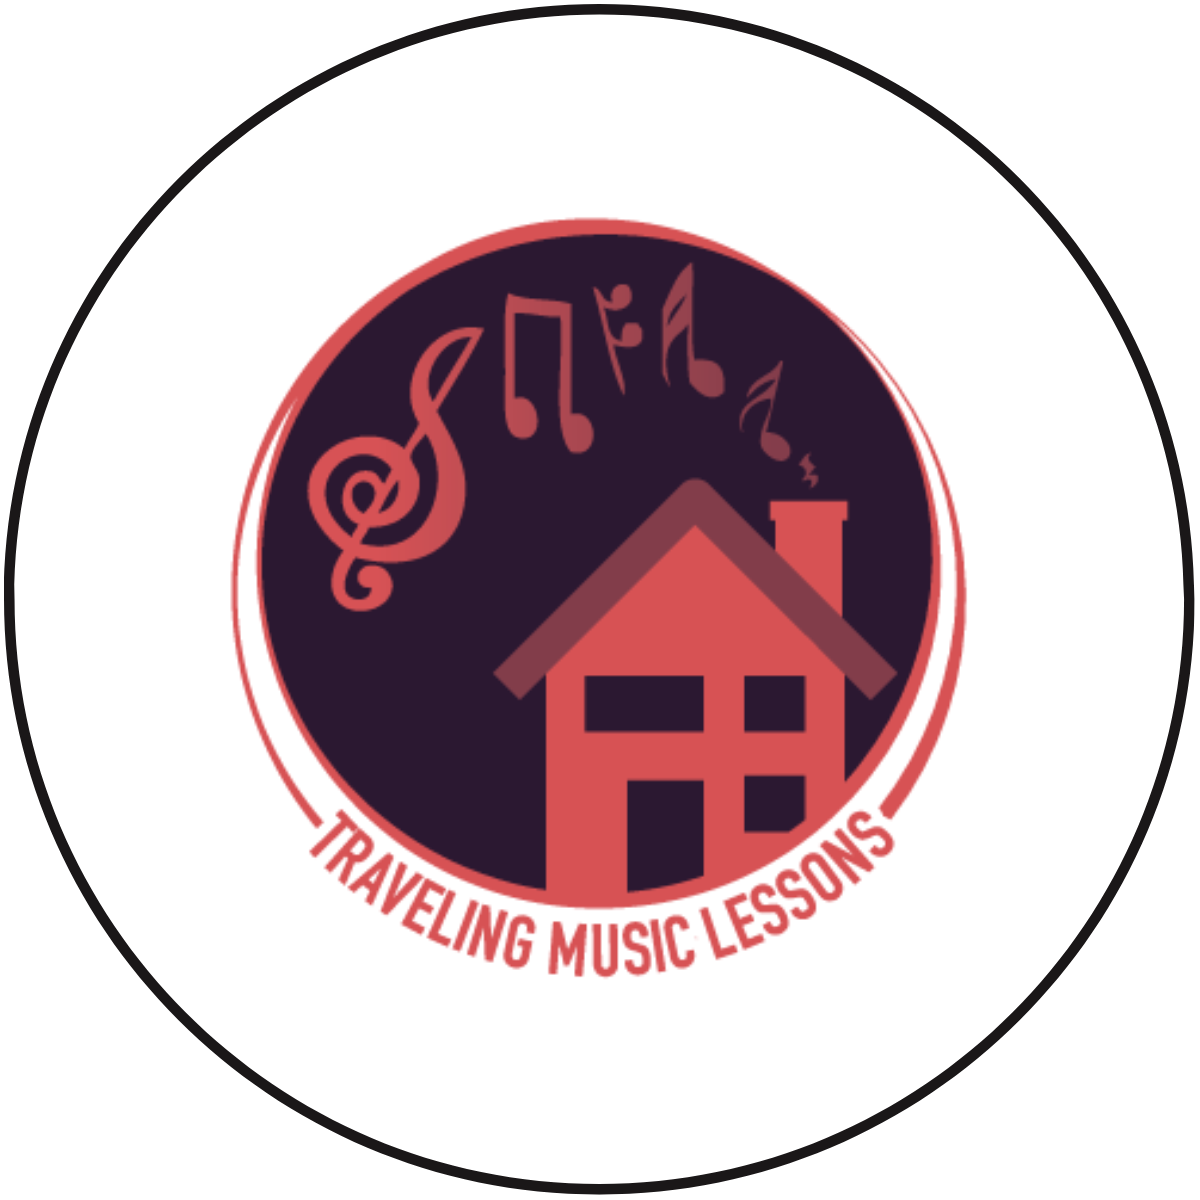 Traveling Music Lessons